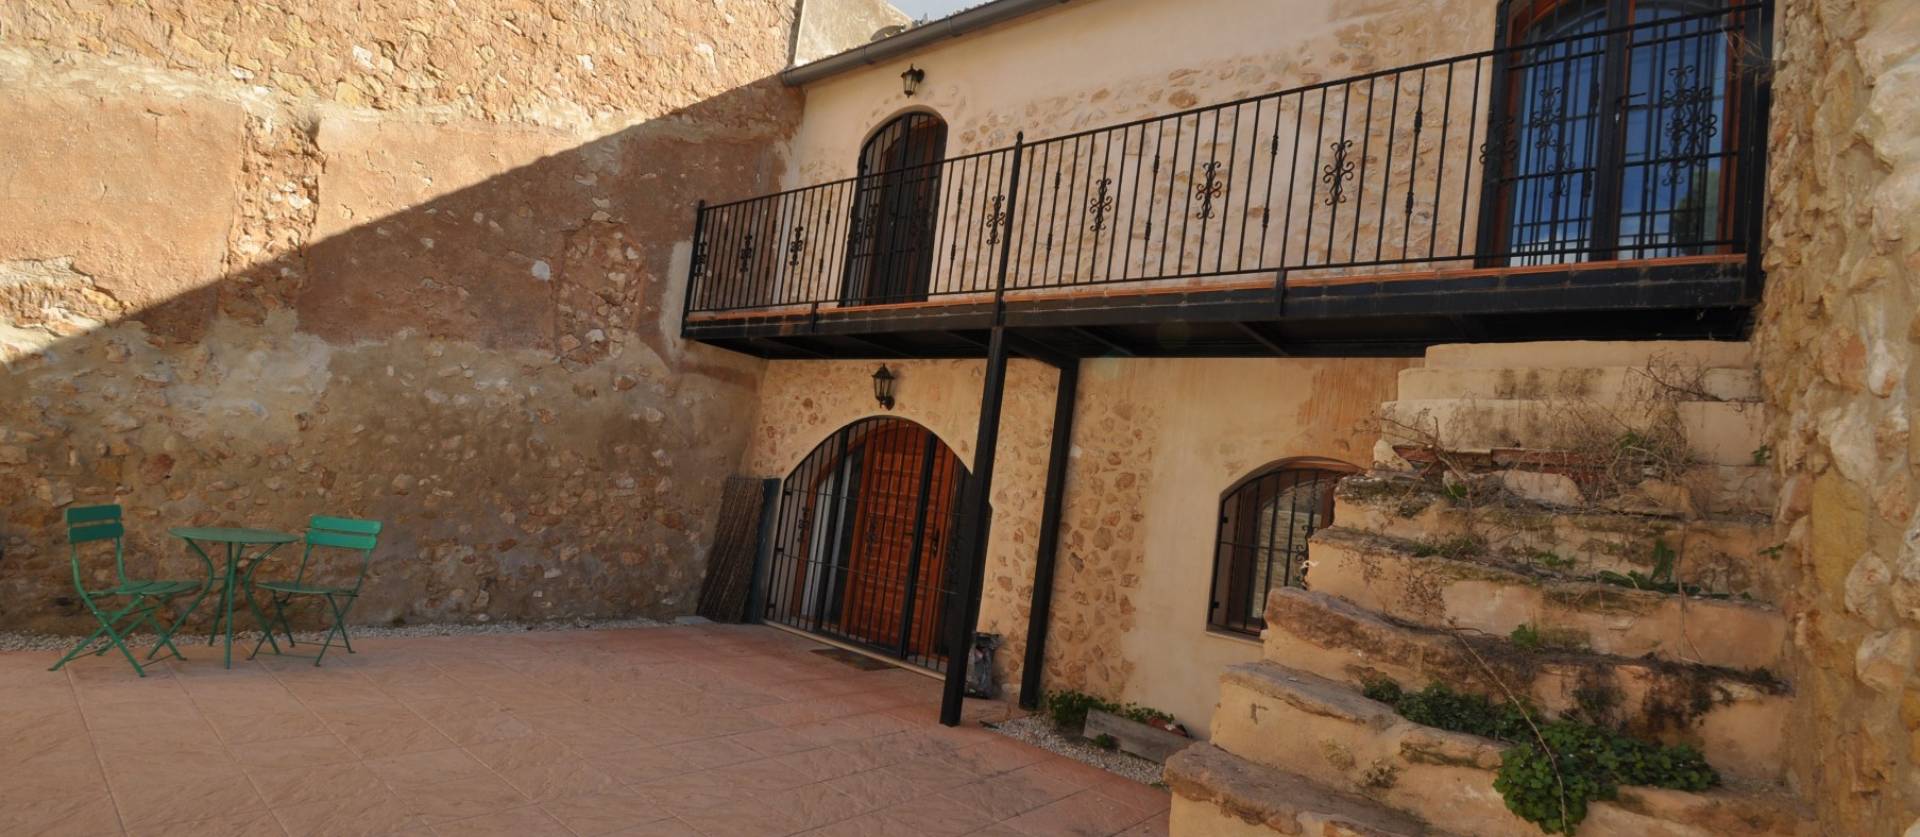 Sale - Country House - Pinoso